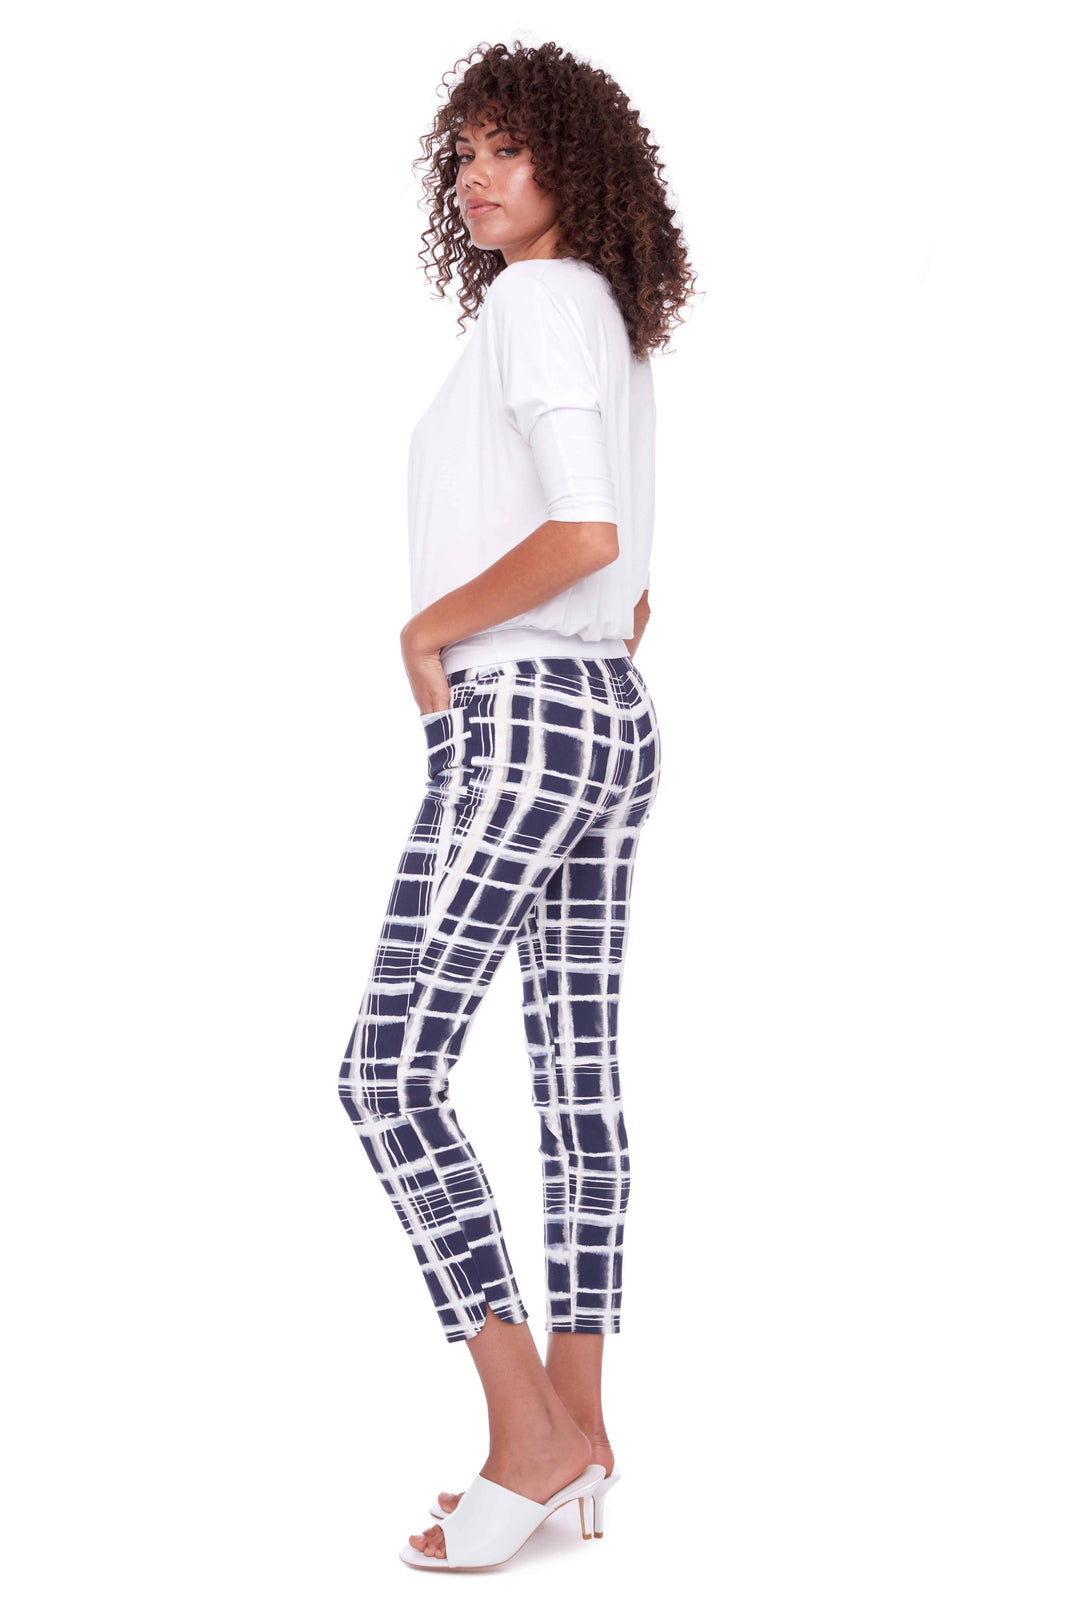 UP! Womens Pant 68026